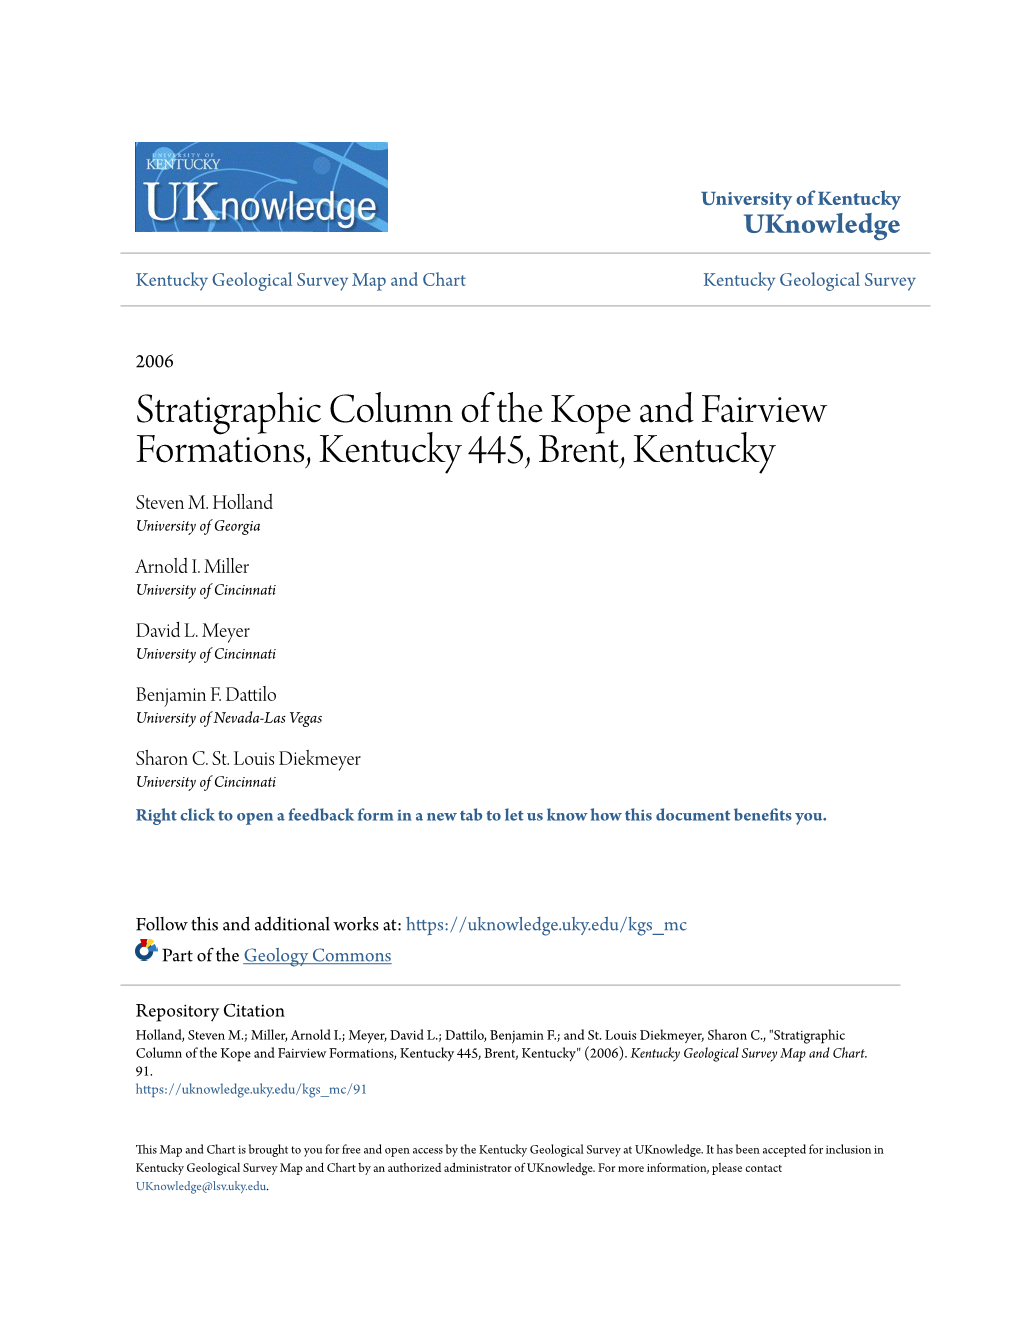 Stratigraphic Column of the Kope and Fairview Formations, Kentucky 445, Brent, Kentucky Steven M